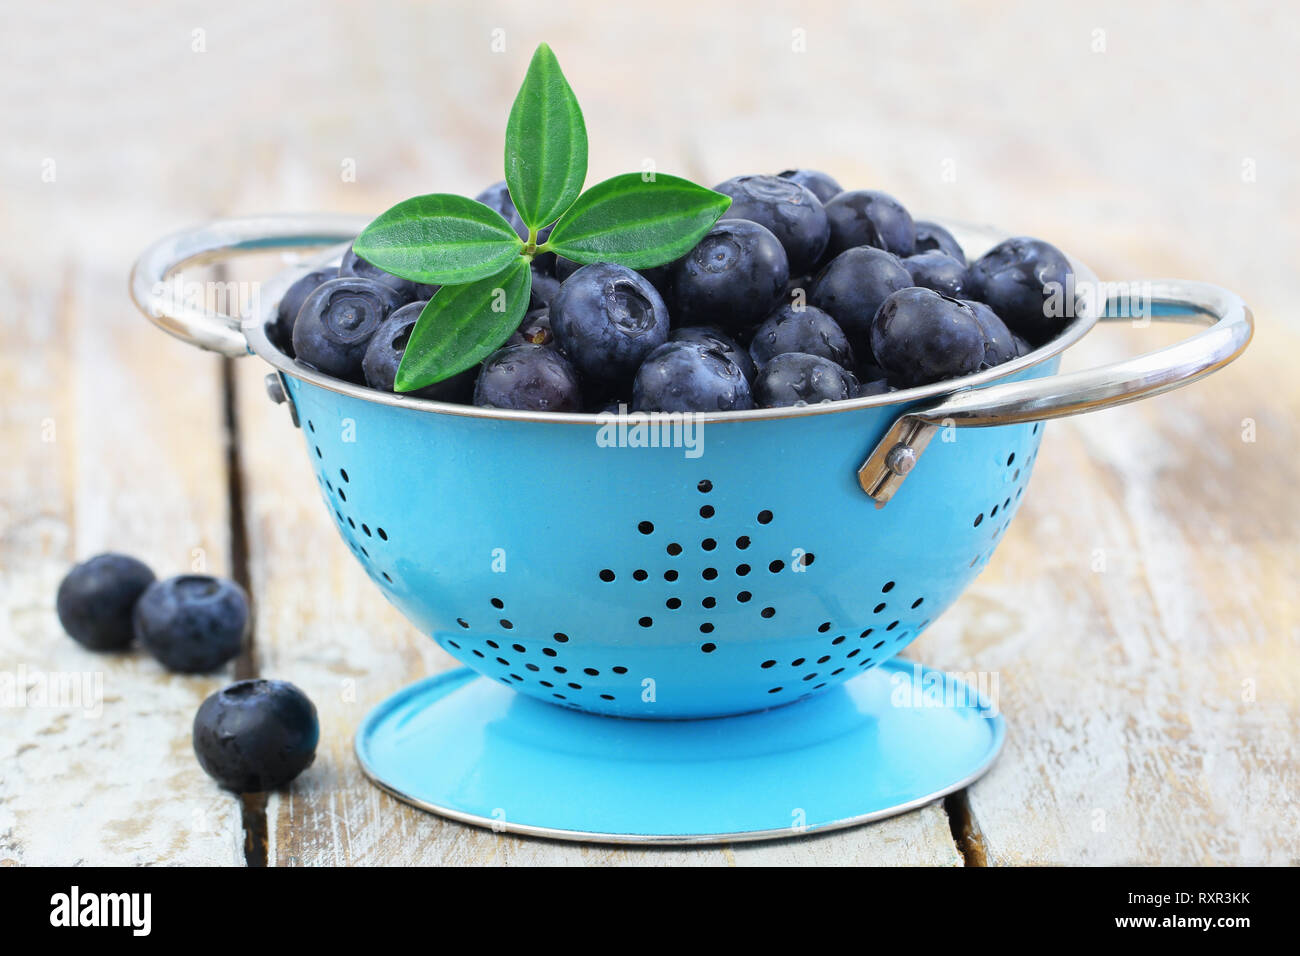 Freshly washed blueberries in blue aluminum colander on rustic wooden surface Stock Photo